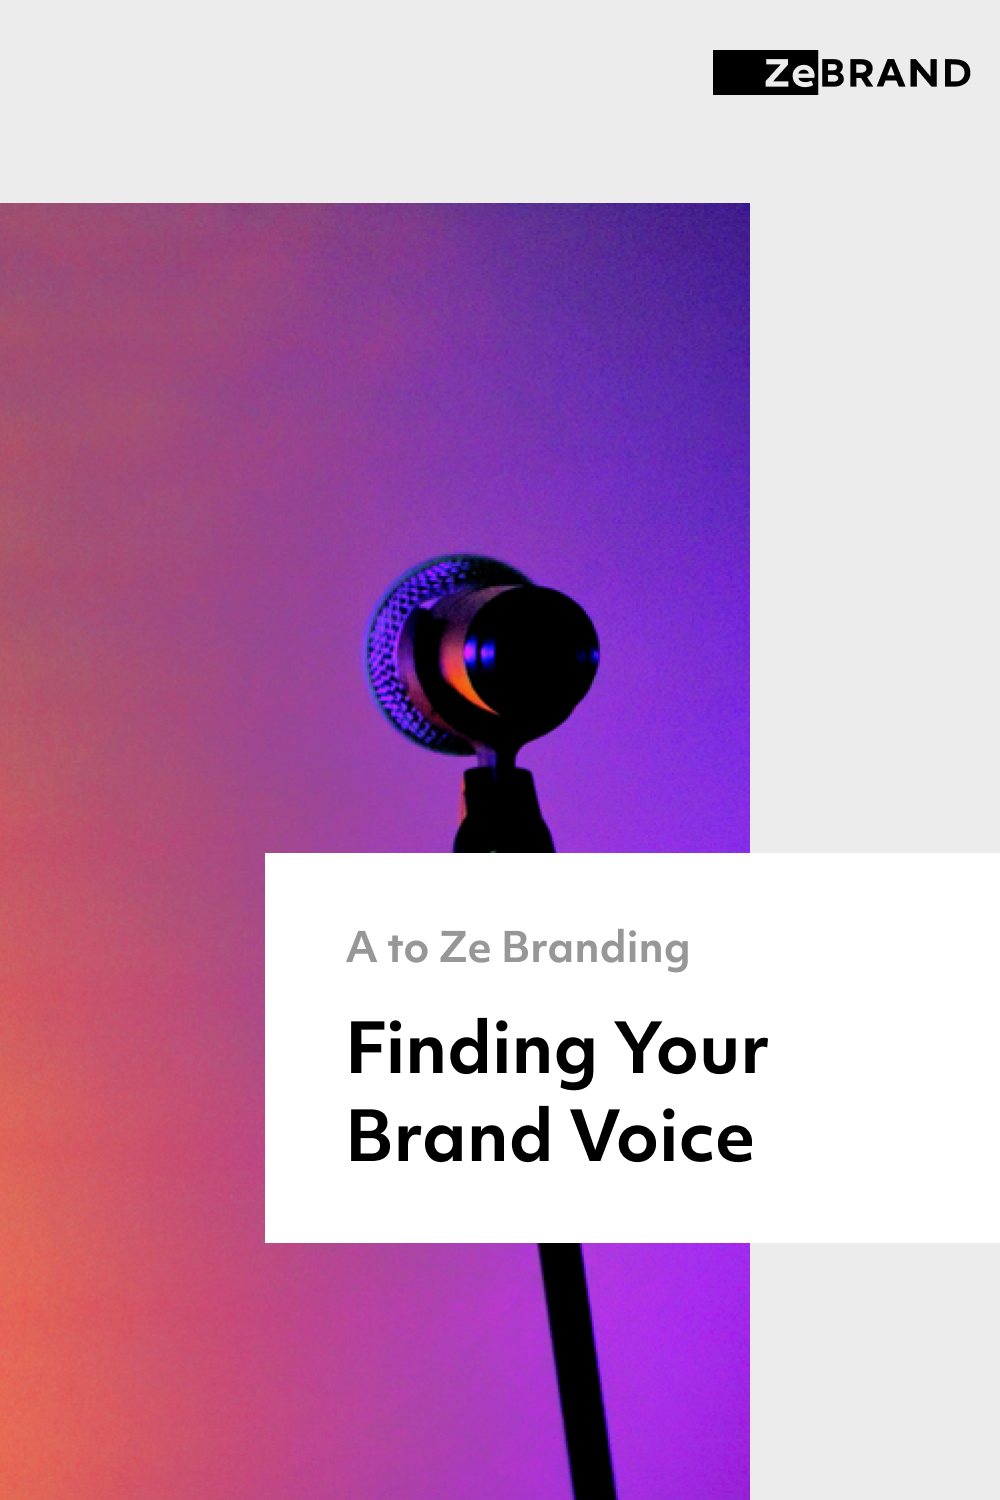 The microphone that spreads the brand voice